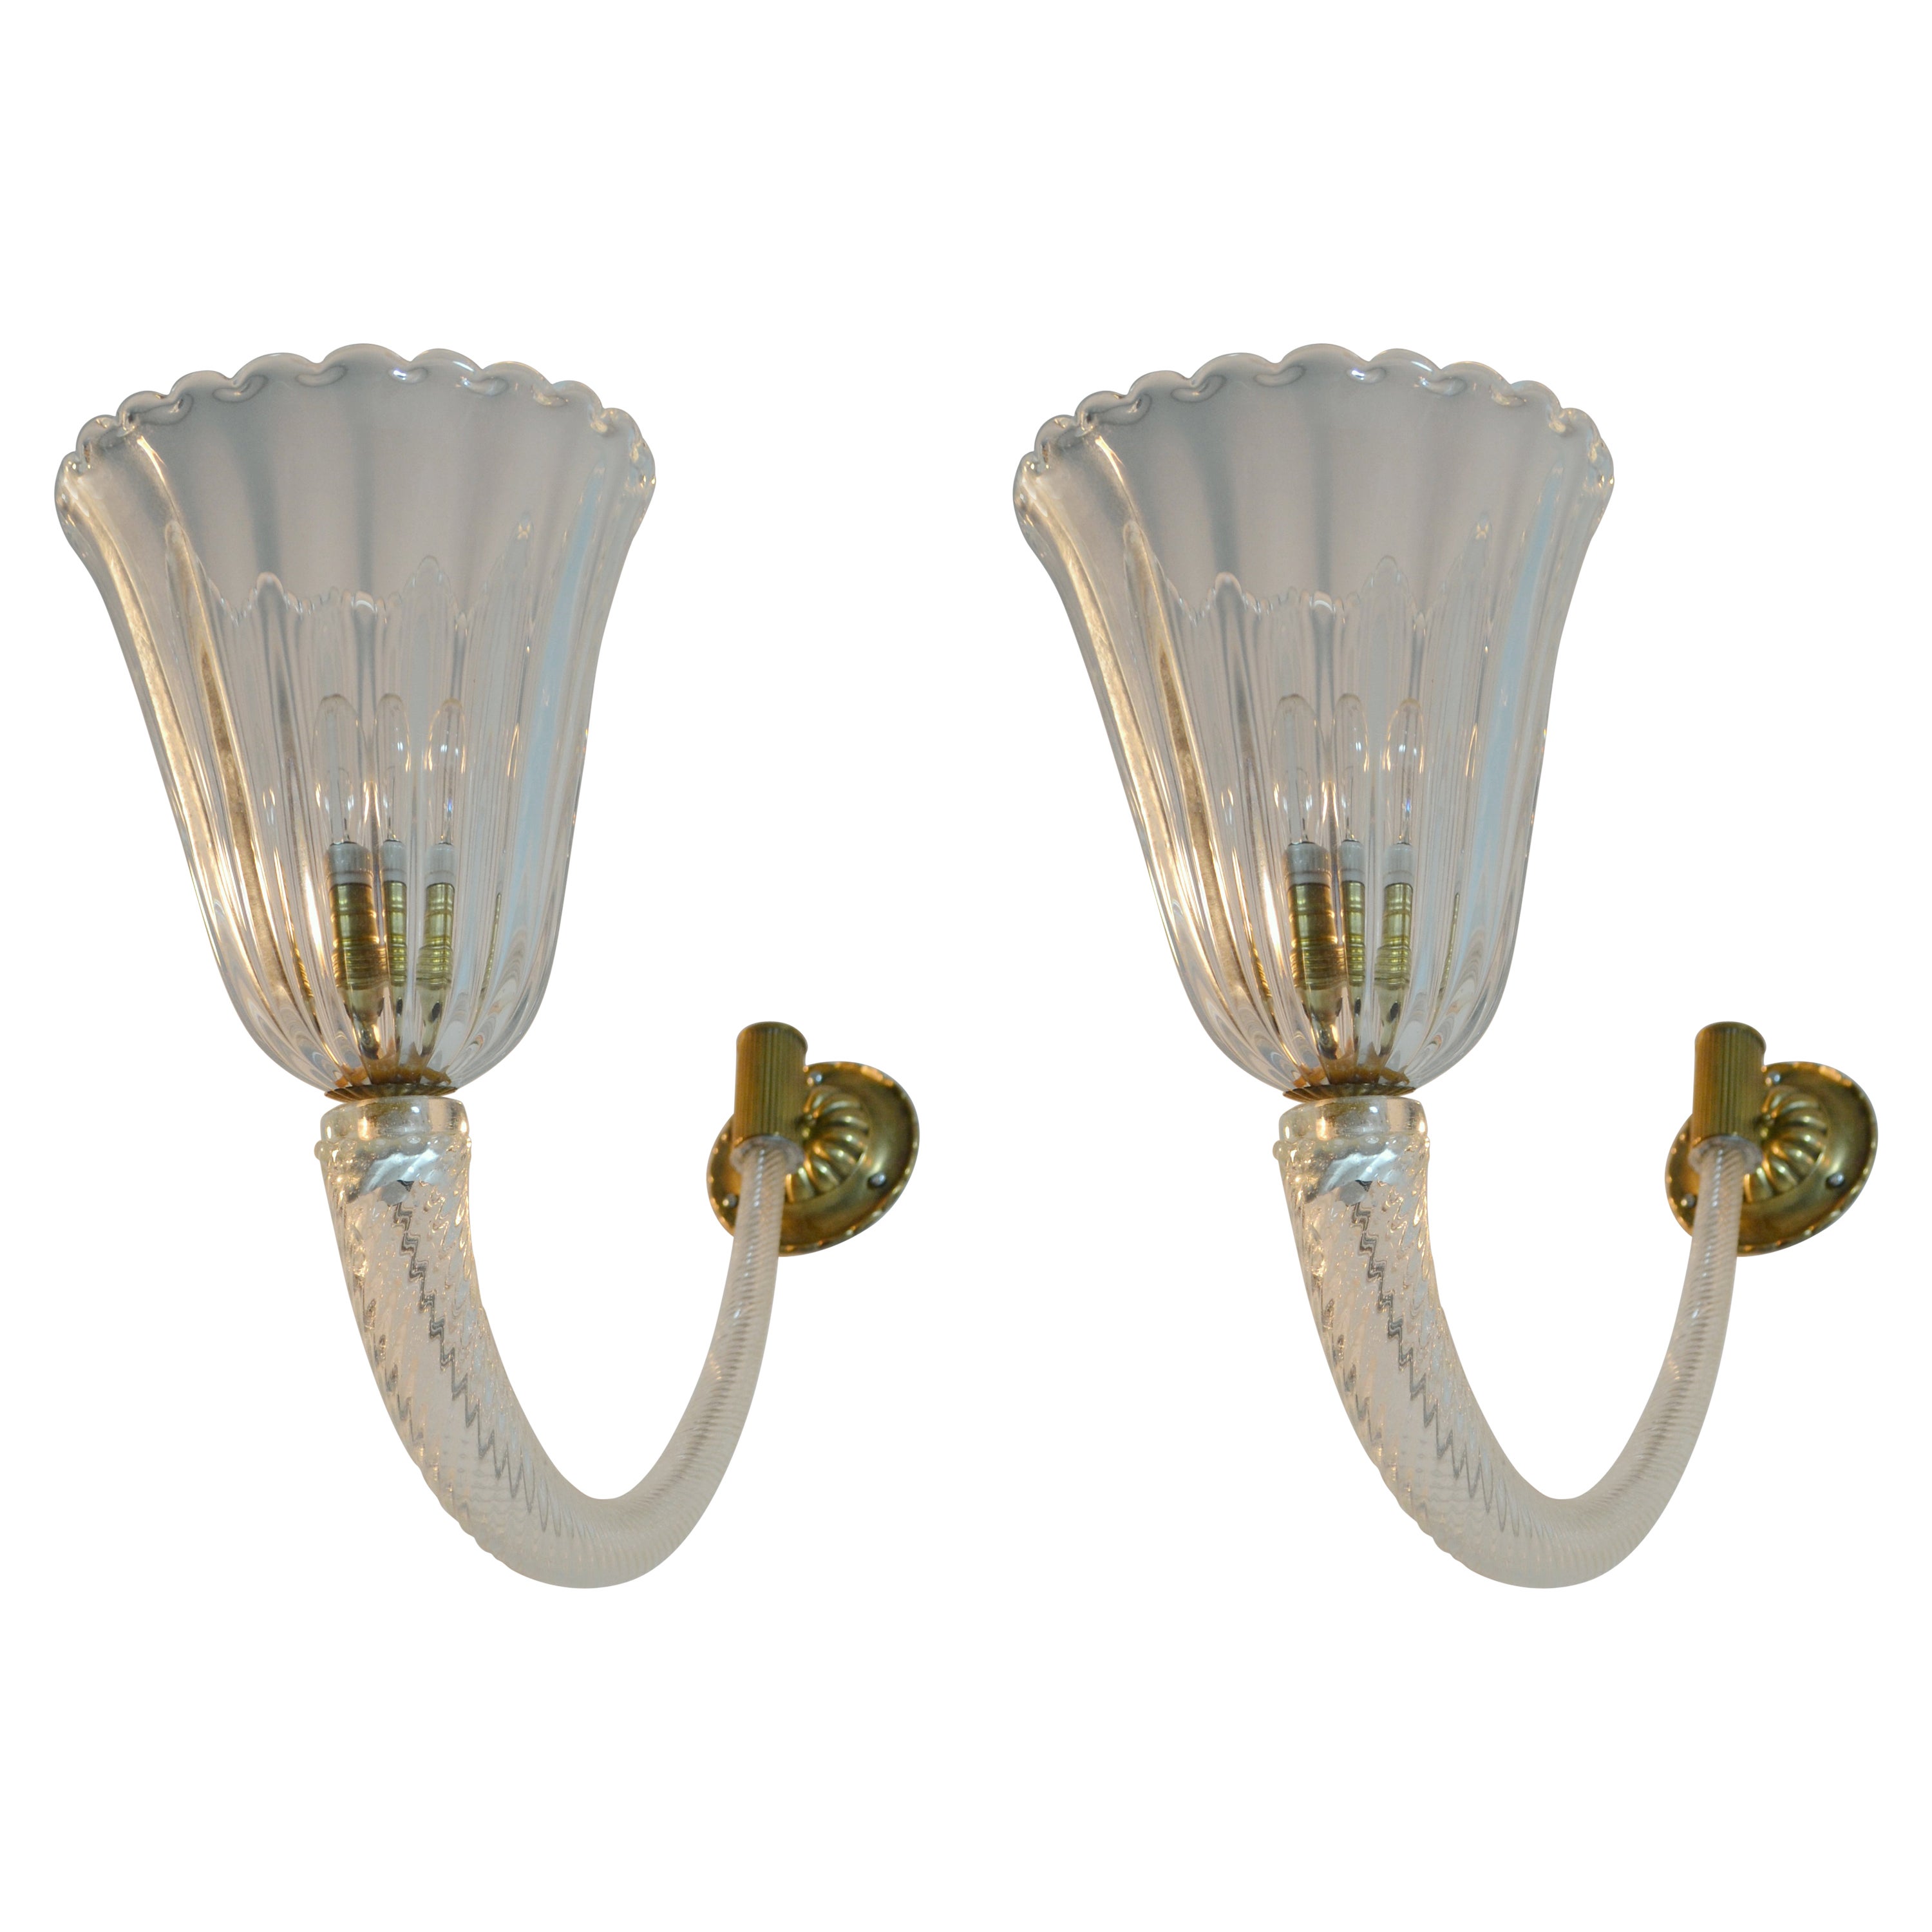 Wall Sconces Murano Clear Glass and Brass 1940's in the Style of Barovier & Toso